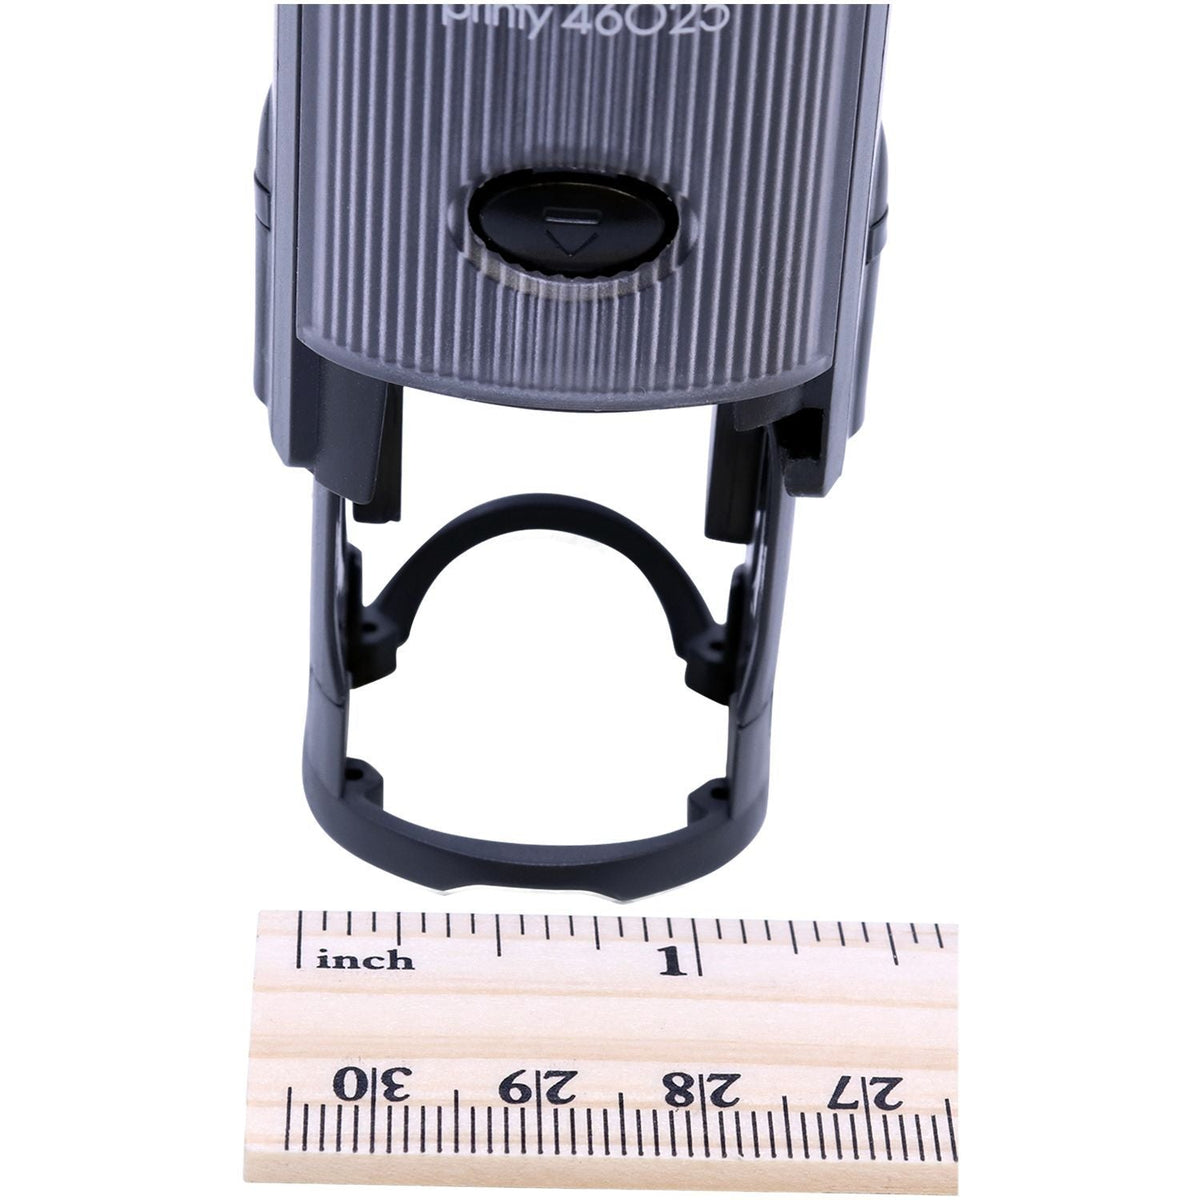 Measurment of Self-Inking Round Curious Smiley Stamp with Ruler